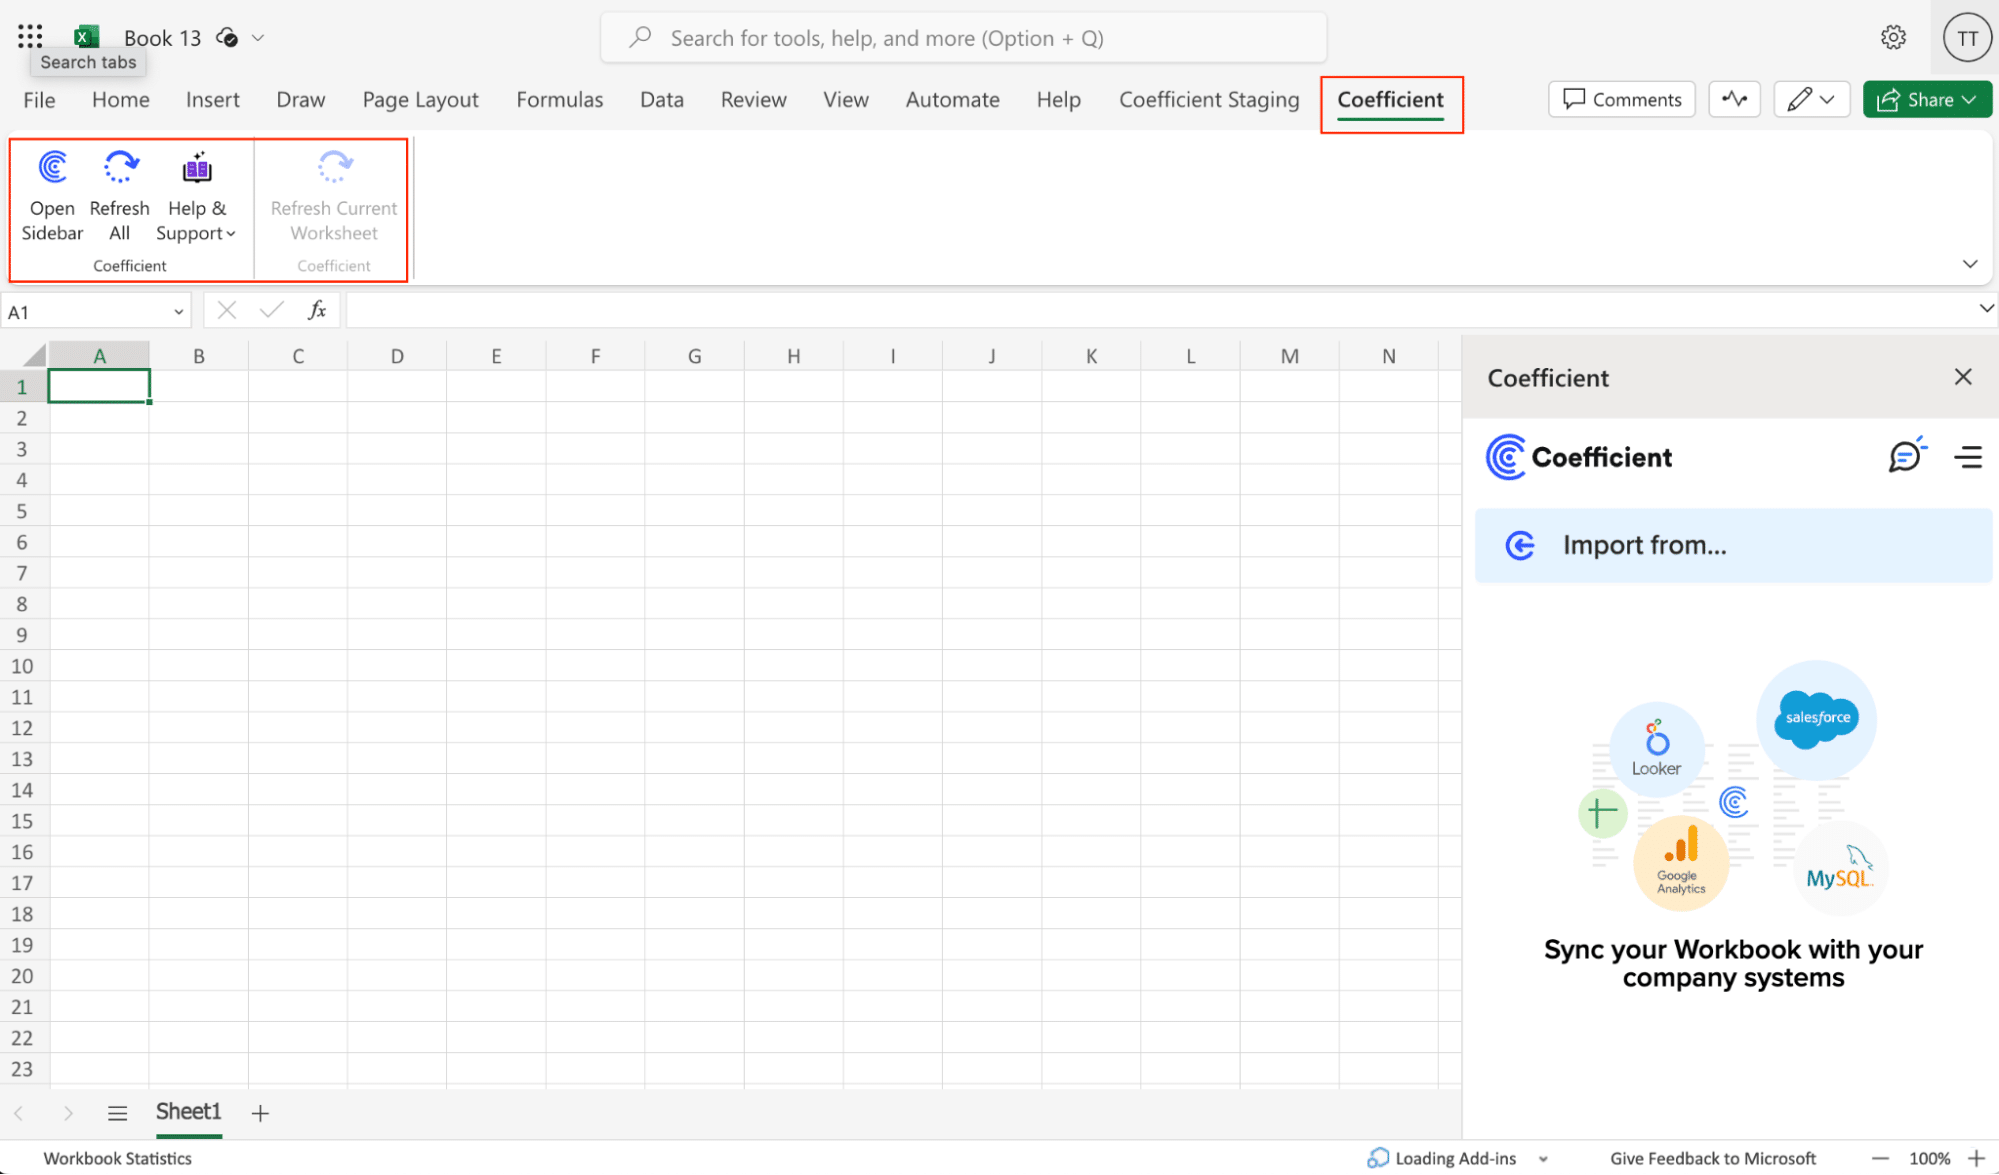 Coefficient tab added to Excel's top navigation bar after install